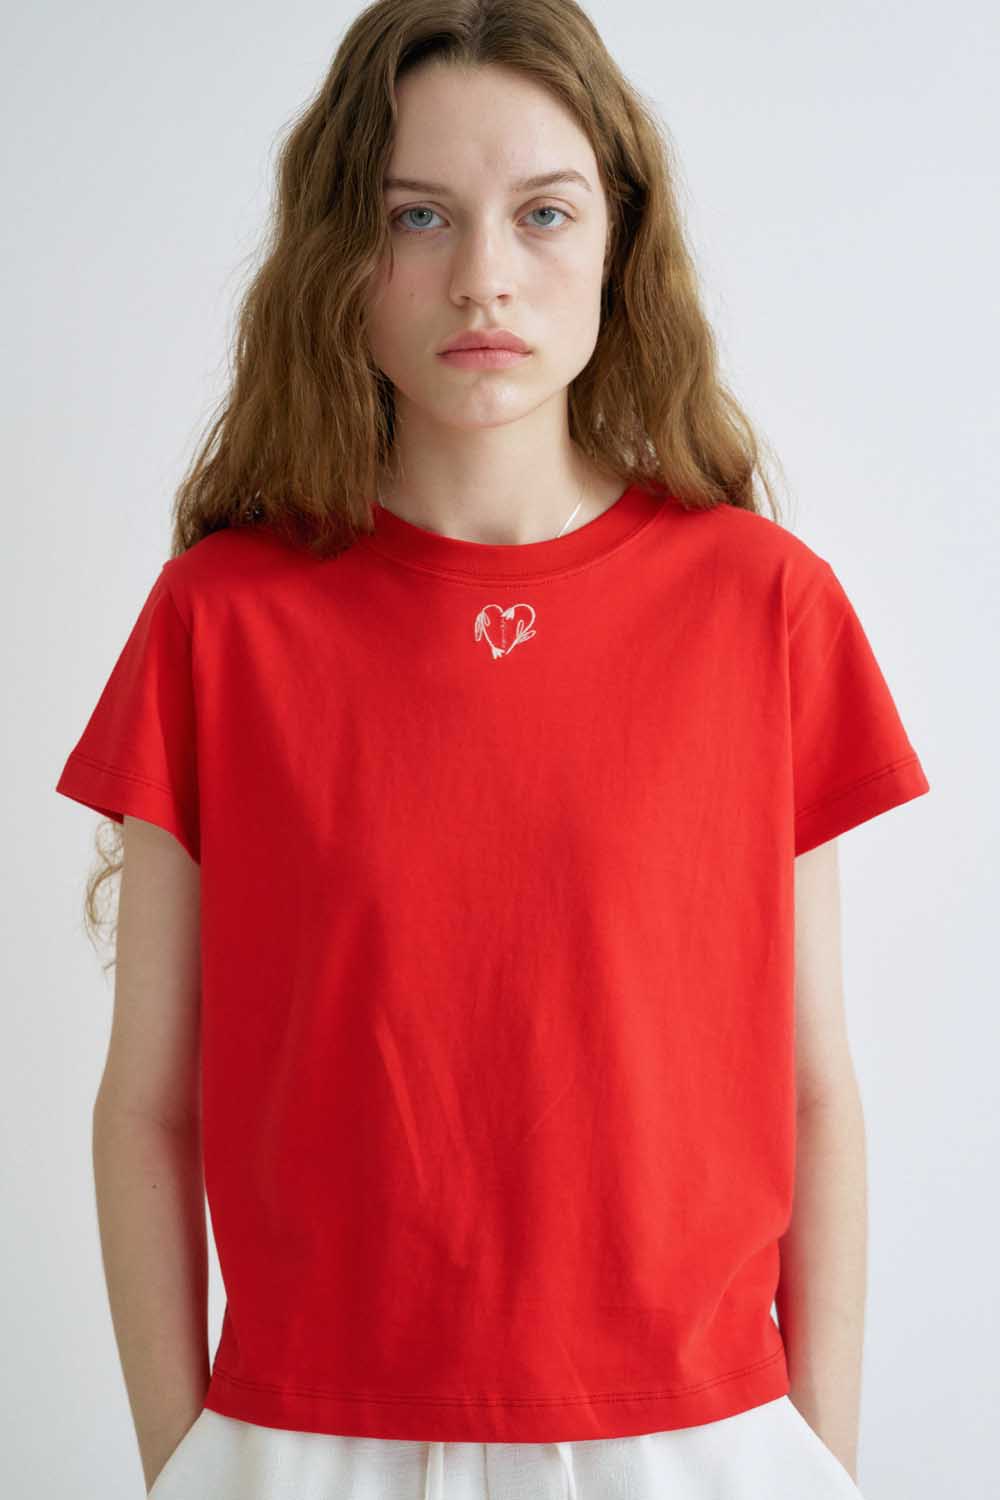 S Heart Embroidery Tshirt_Red